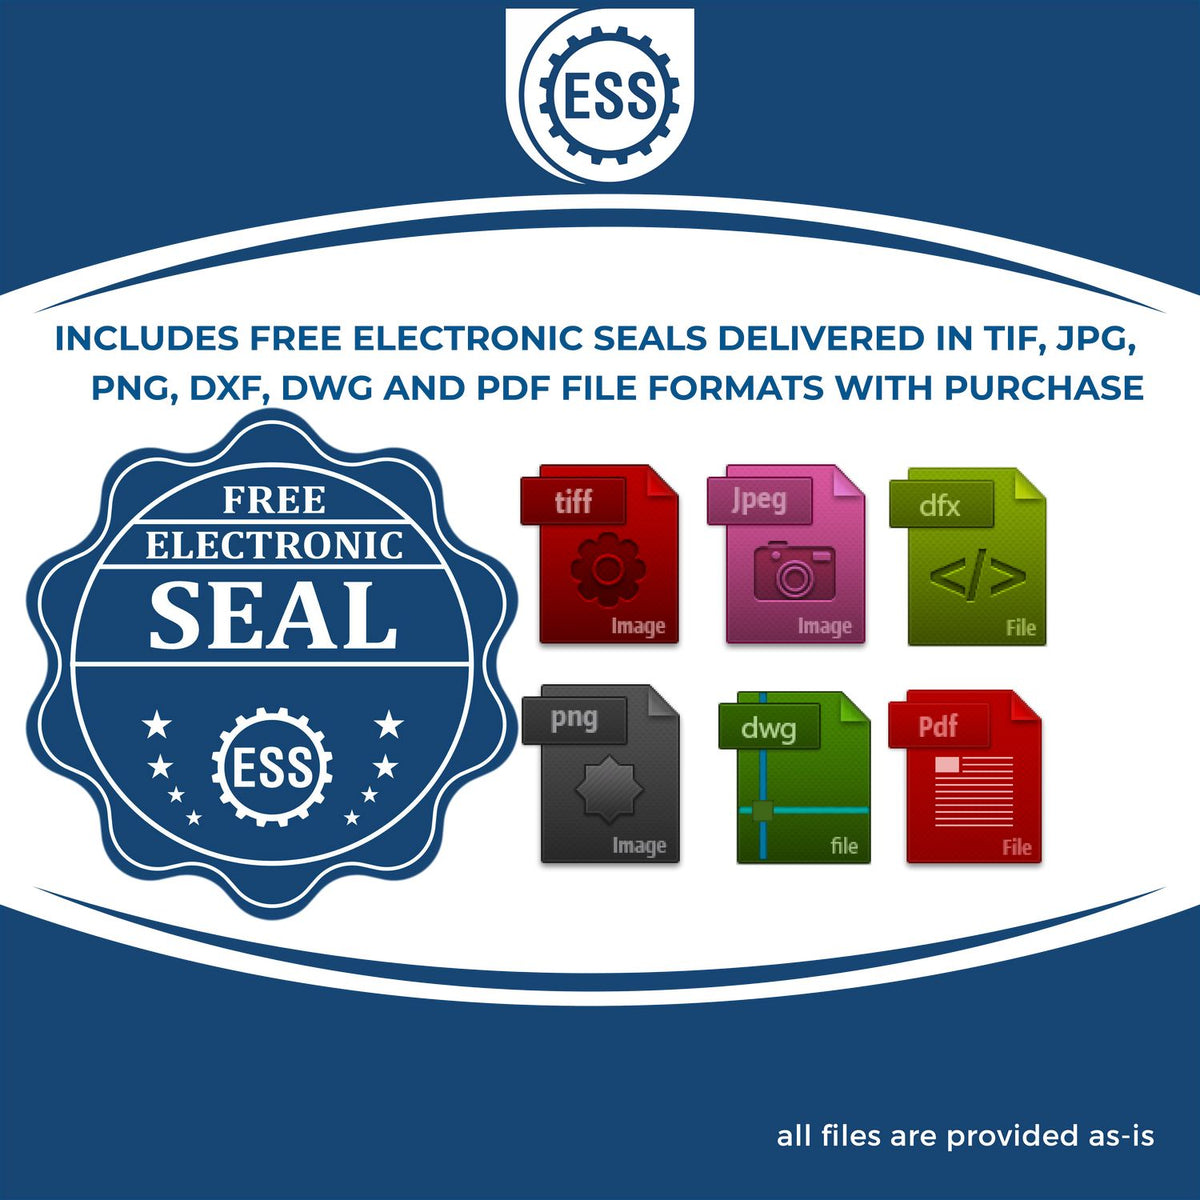 An infographic for the free electronic seal for the Slim Pre-Inked Kansas Professional Geologist Seal Stamp illustrating the different file type icons such as DXF, DWG, TIF, JPG and PNG.